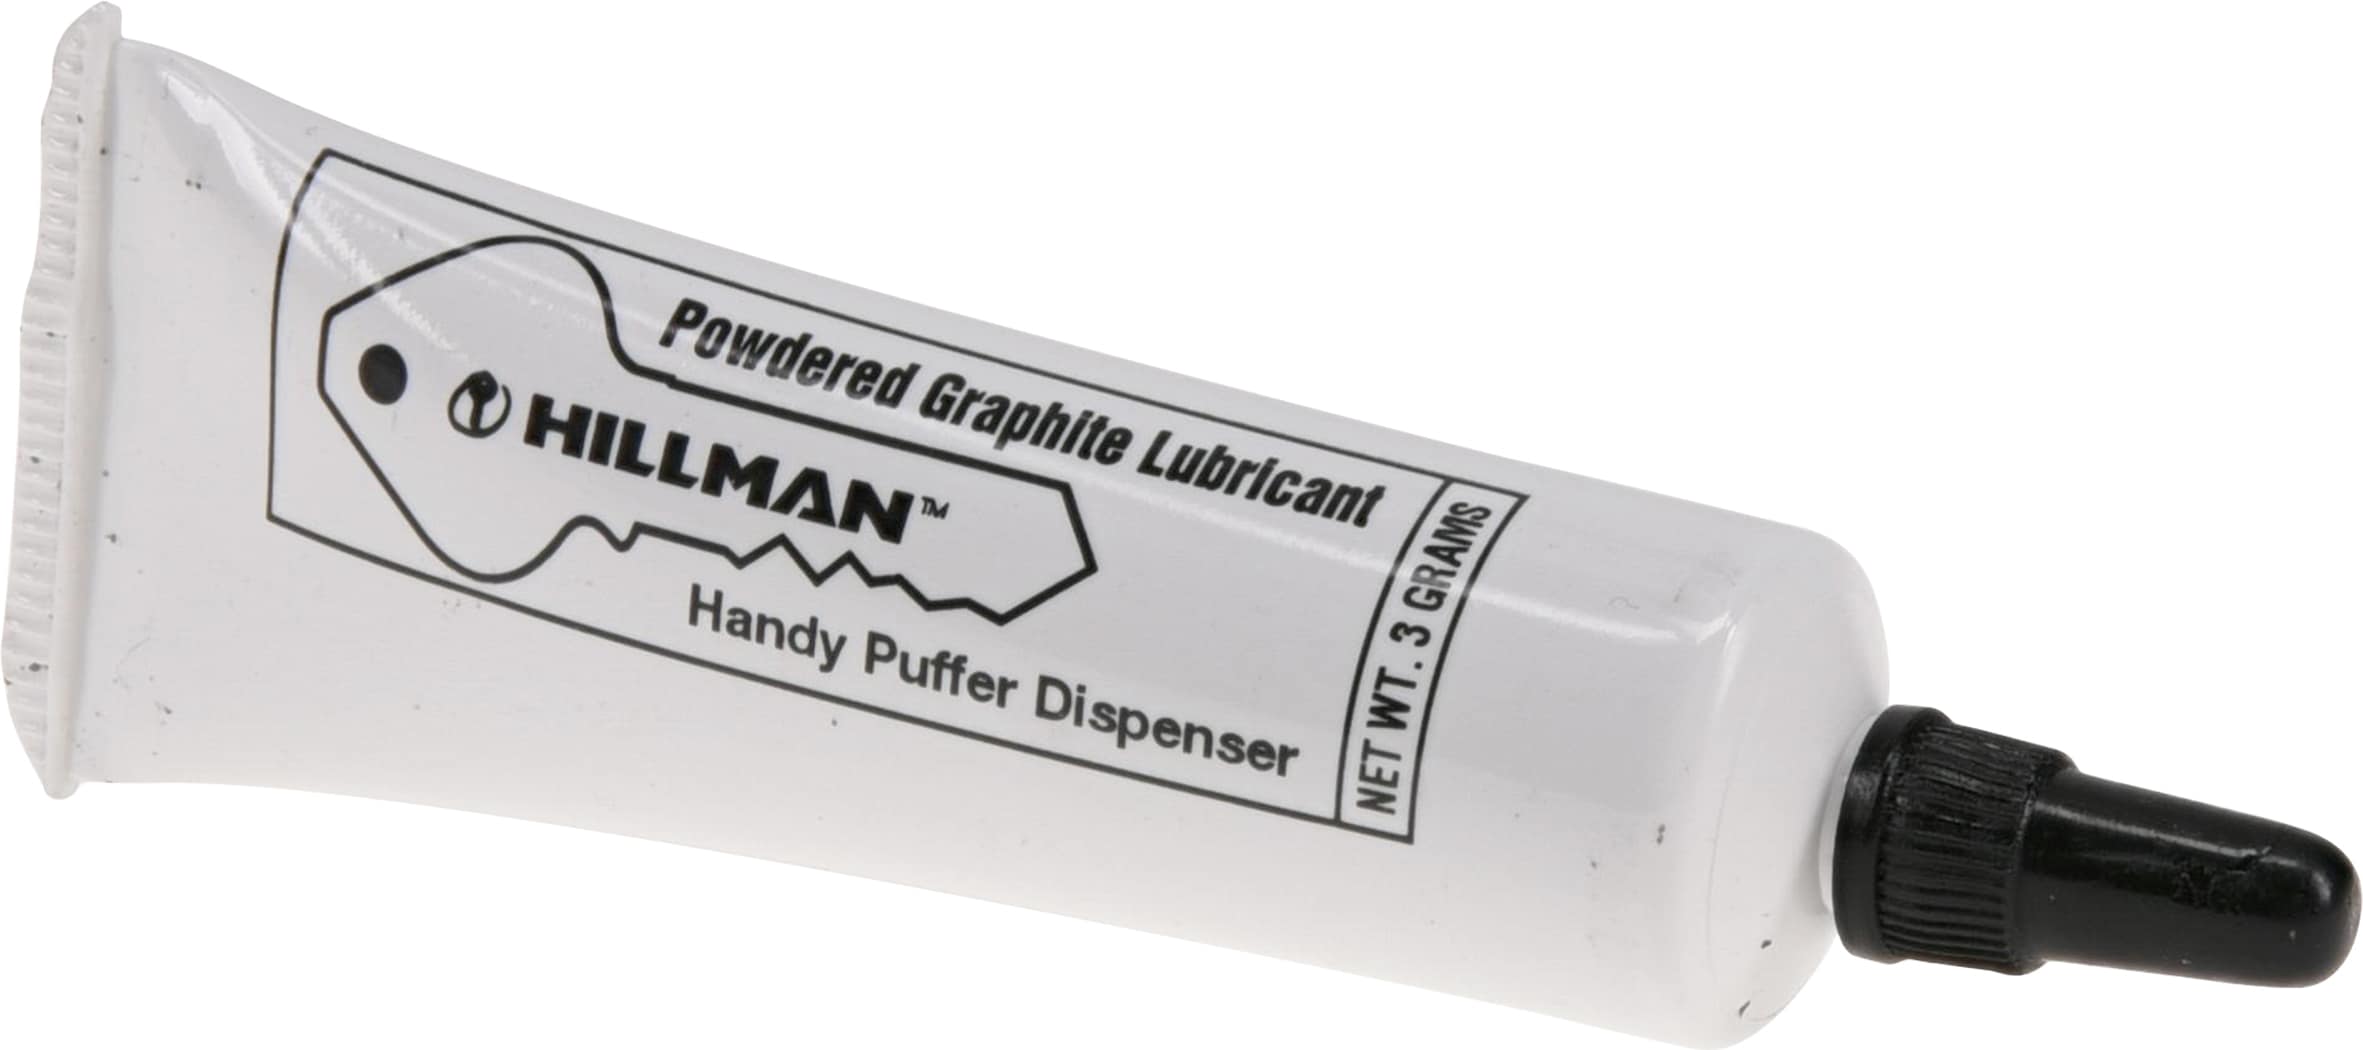 Ags Lubricant, Graphite, Powdered - 0.21 oz